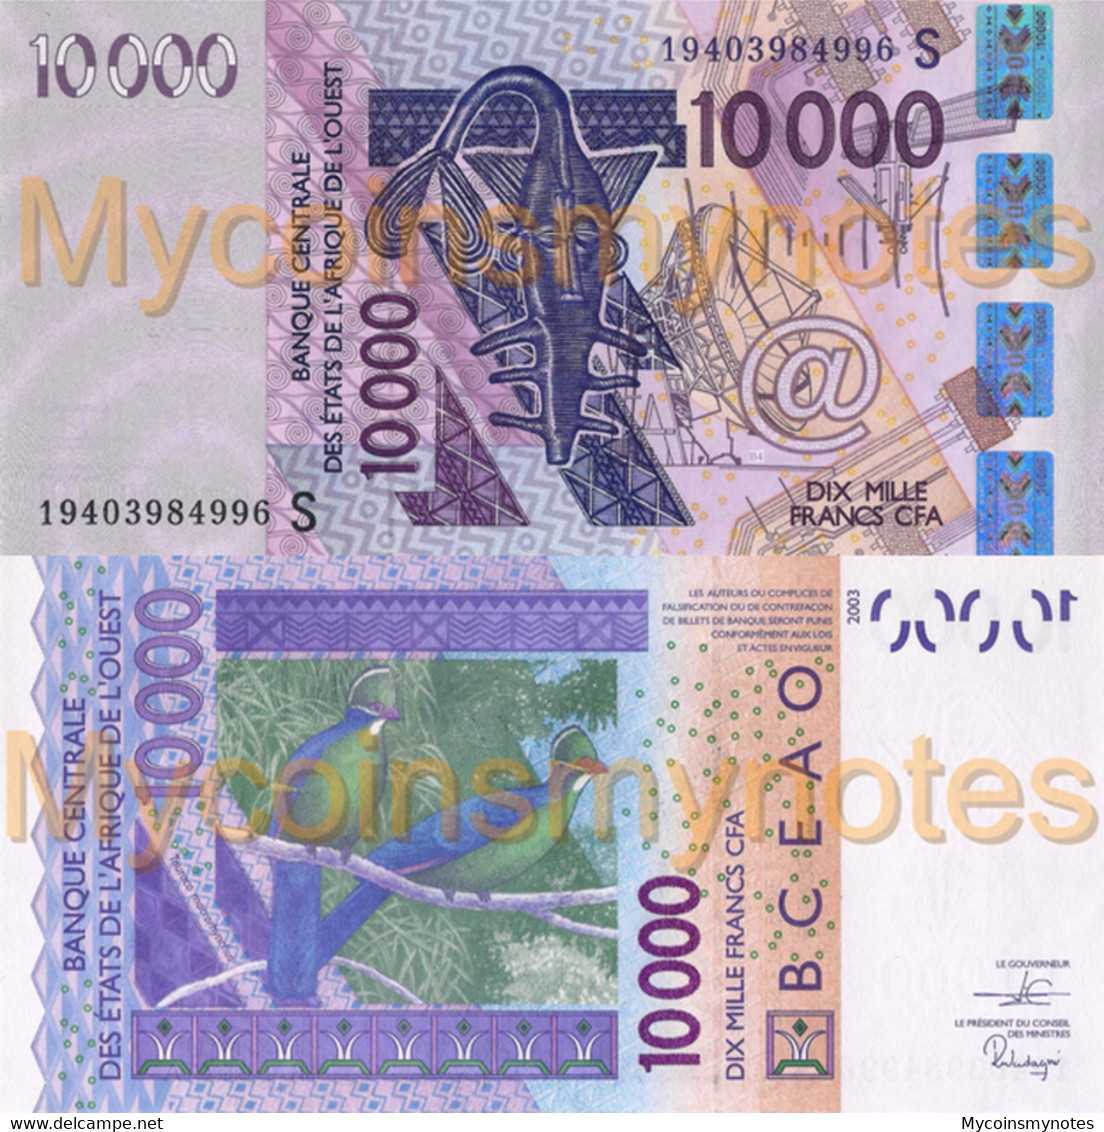 WEST AFRICAN STATES, GUINEA BISSAU, 10000, 2019, Code S, P-New, Not In Catalog, UNC - West African States